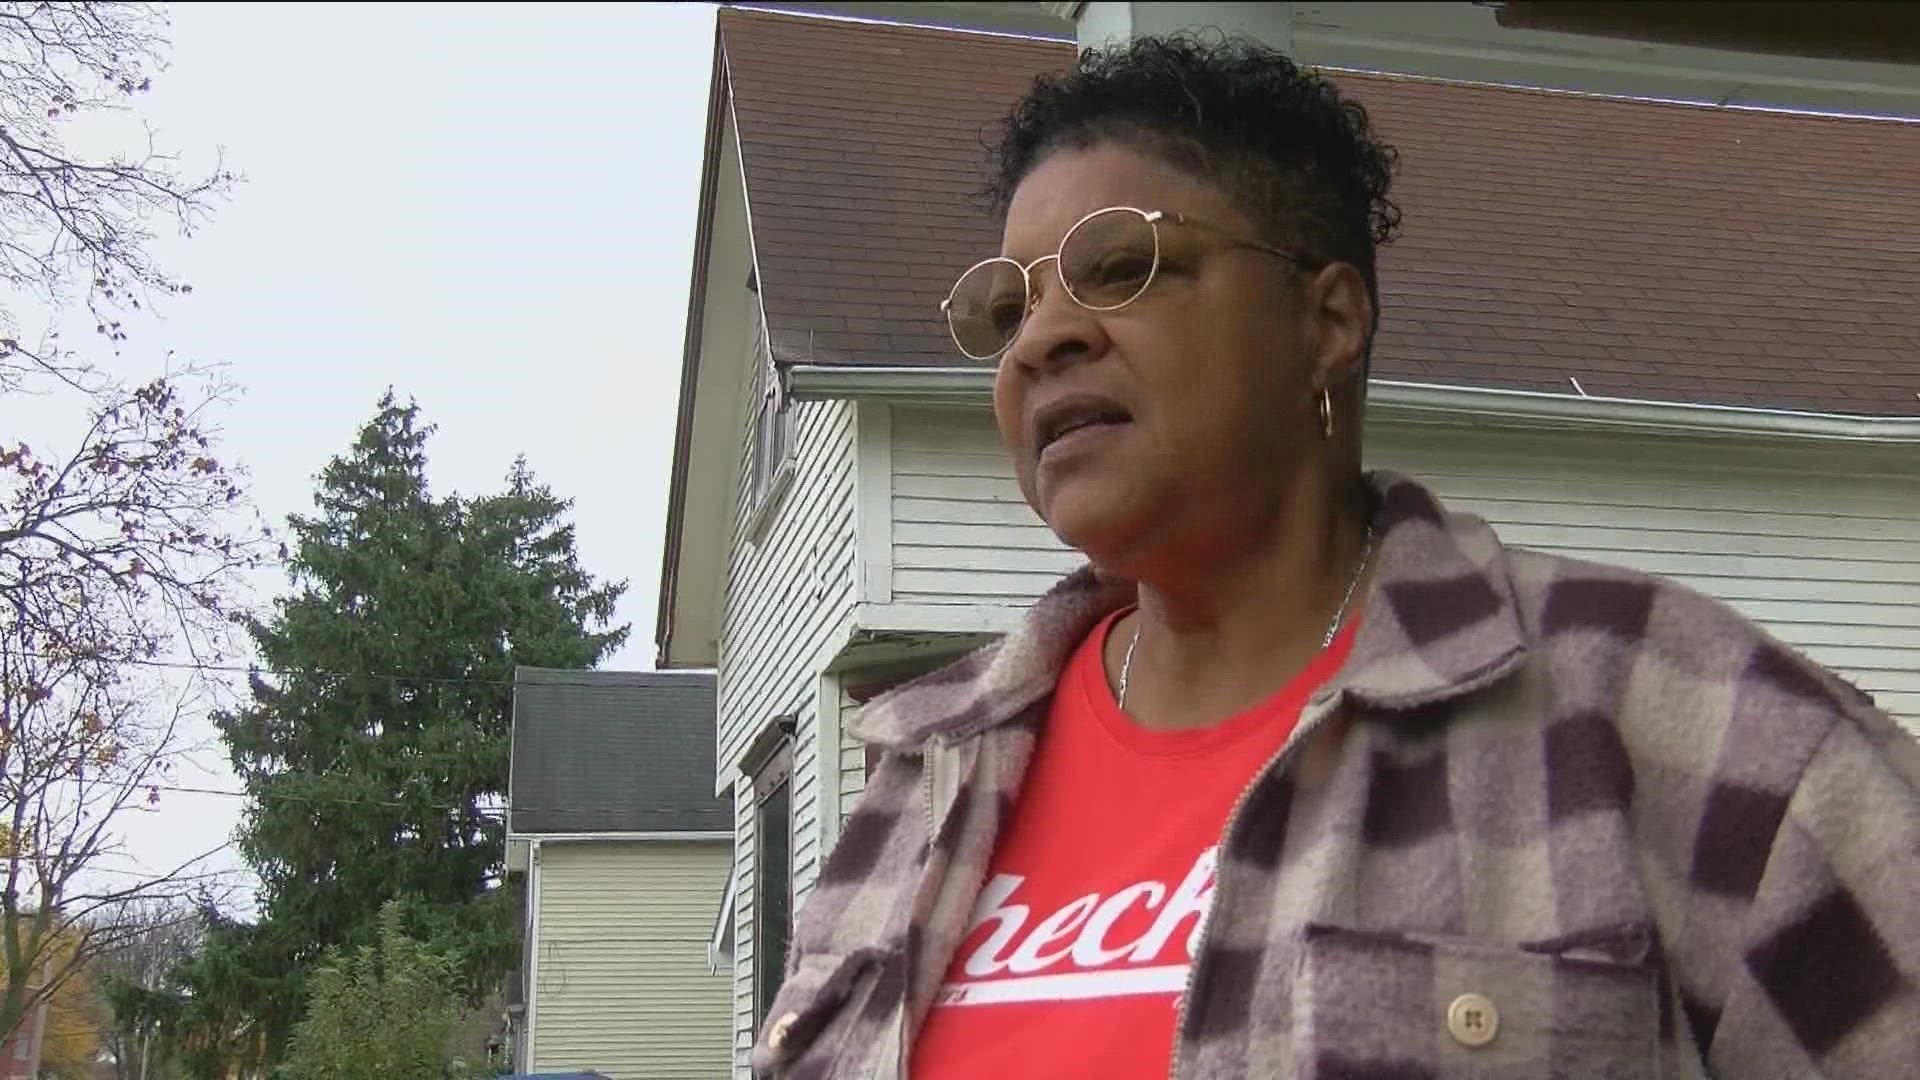 Junction neighborhood residents talk about shootings and other violence in the city.